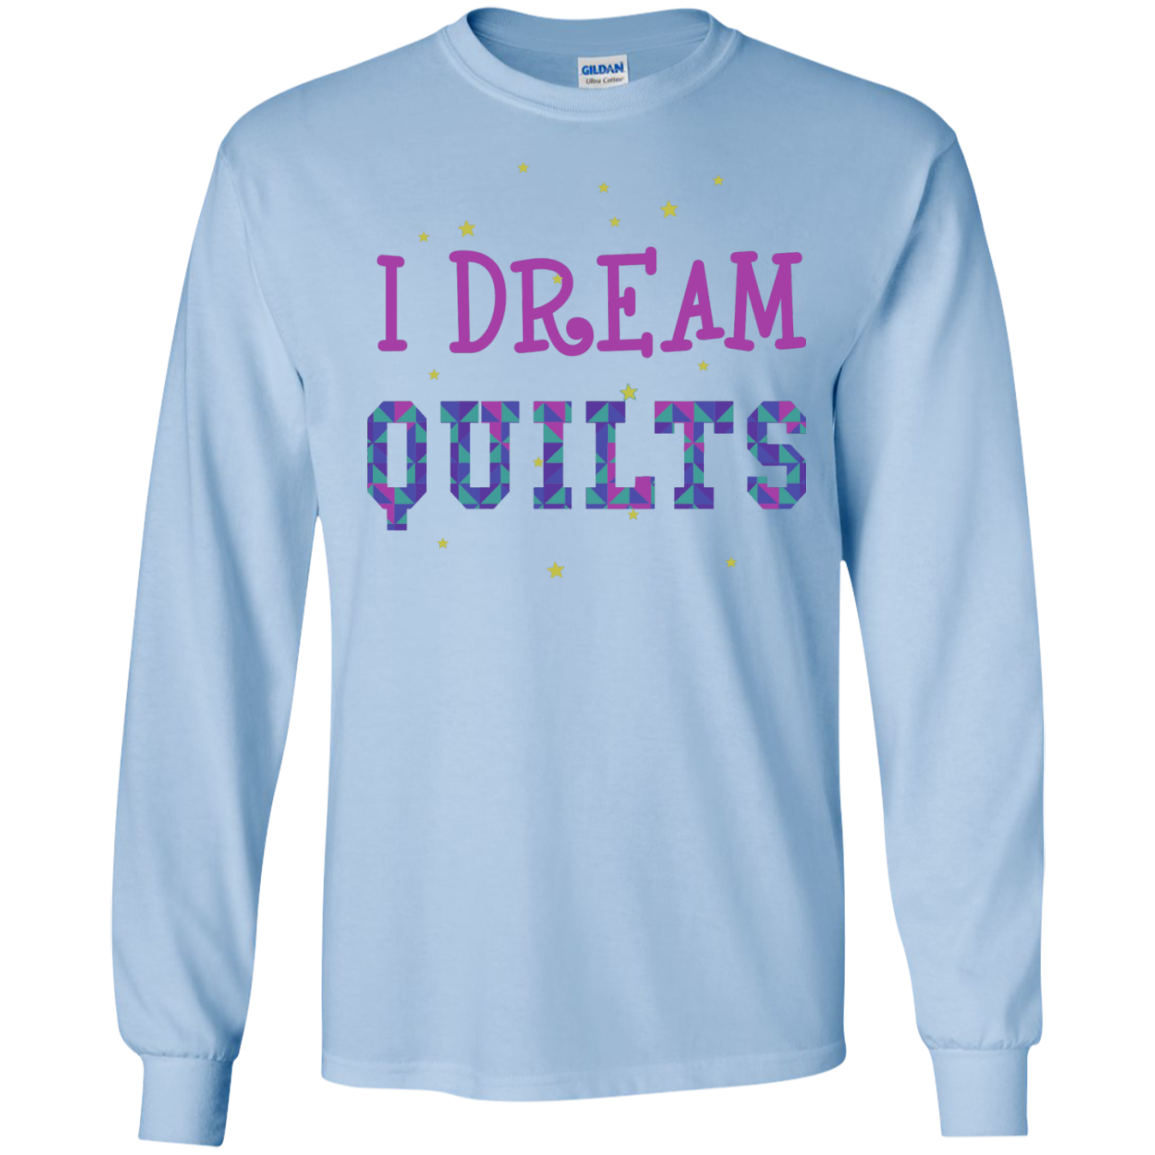 I Dream Quilts Long Sleeve Ultra Cotton T-Shirt - Crafter4Life - 8